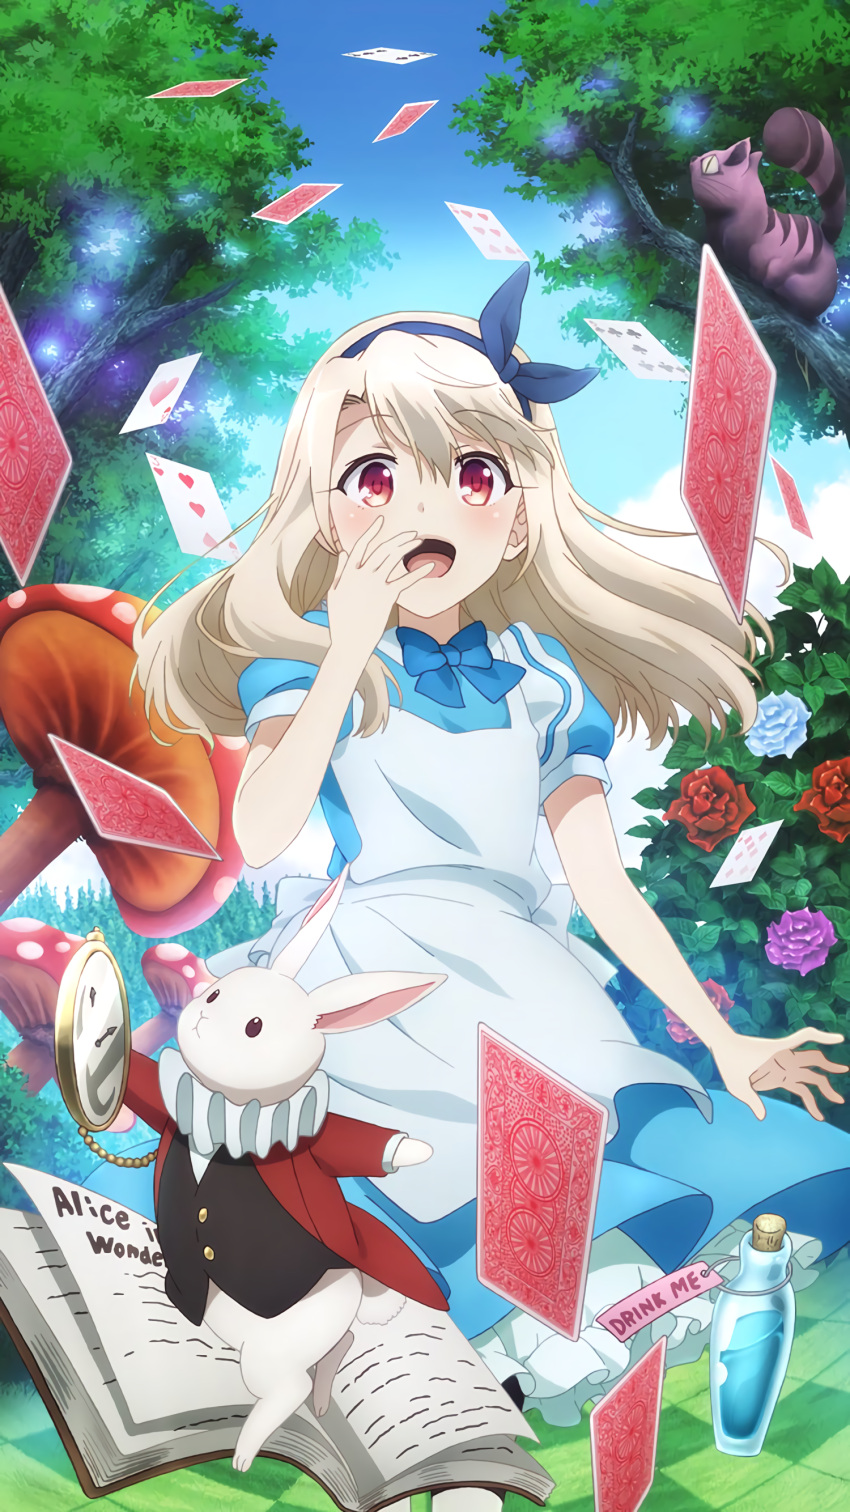 1girl :d absurdres alice_(alice_in_wonderland) alice_(alice_in_wonderland)_(cosplay) alice_in_wonderland apron blonde_hair bloomers book card cheshire_cat_(alice_in_wonderland) cosplay dress drink_me fate/kaleid_liner_prisma_illya fate_(series) flower hair_ribbon highres illyasviel_von_einzbern long_hair looking_at_viewer mushroom official_art open_mouth pantyhose playing_card potion rabbit red_eyes ribbon rose smile tree underwear watch white_legwear white_rabbit_(alice_in_wonderland)